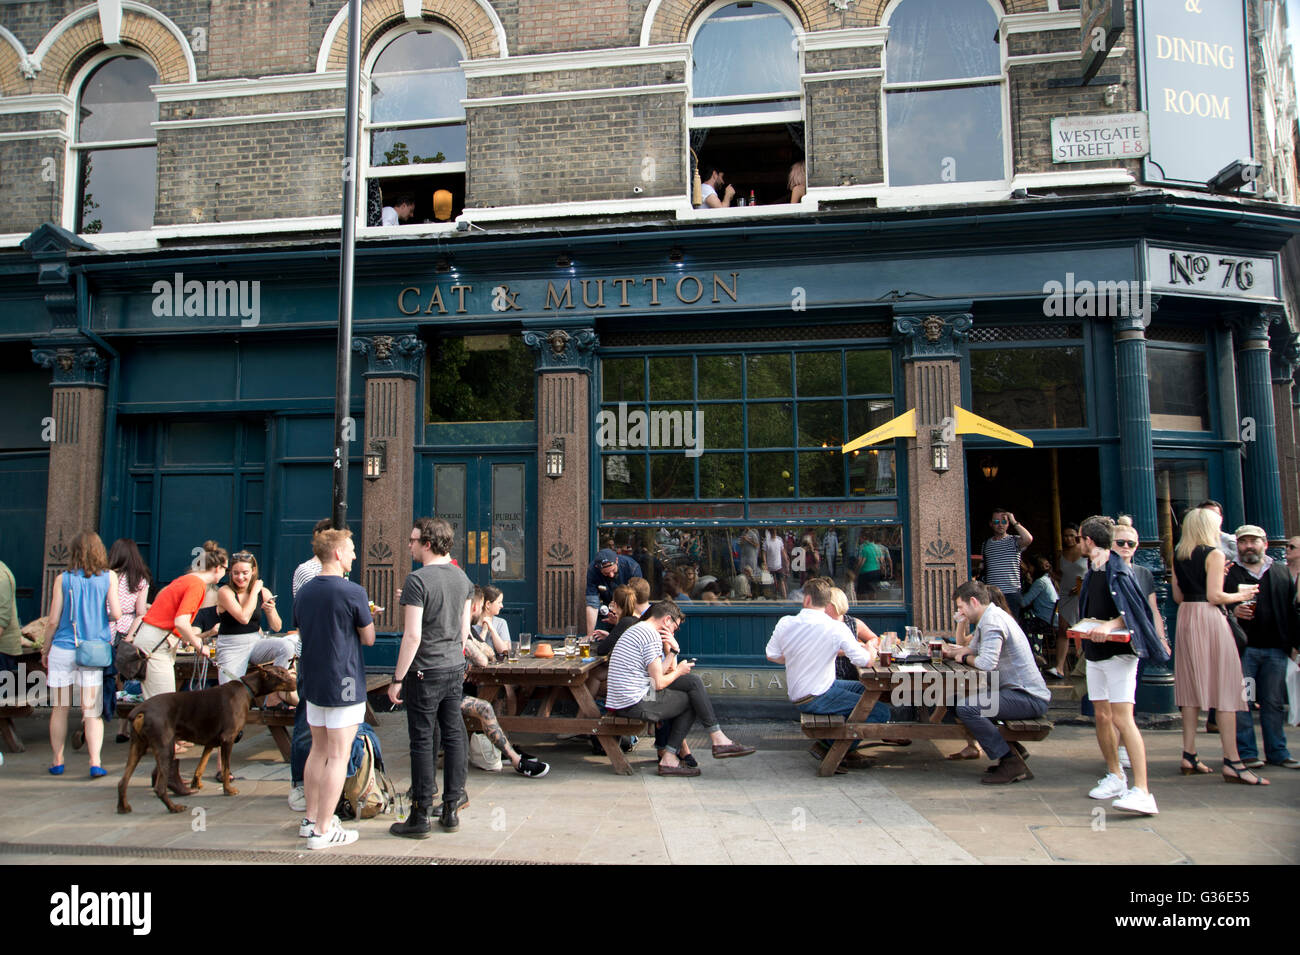 Hackney. Broadway Market. Cat and Mutton pub. Stock Photo